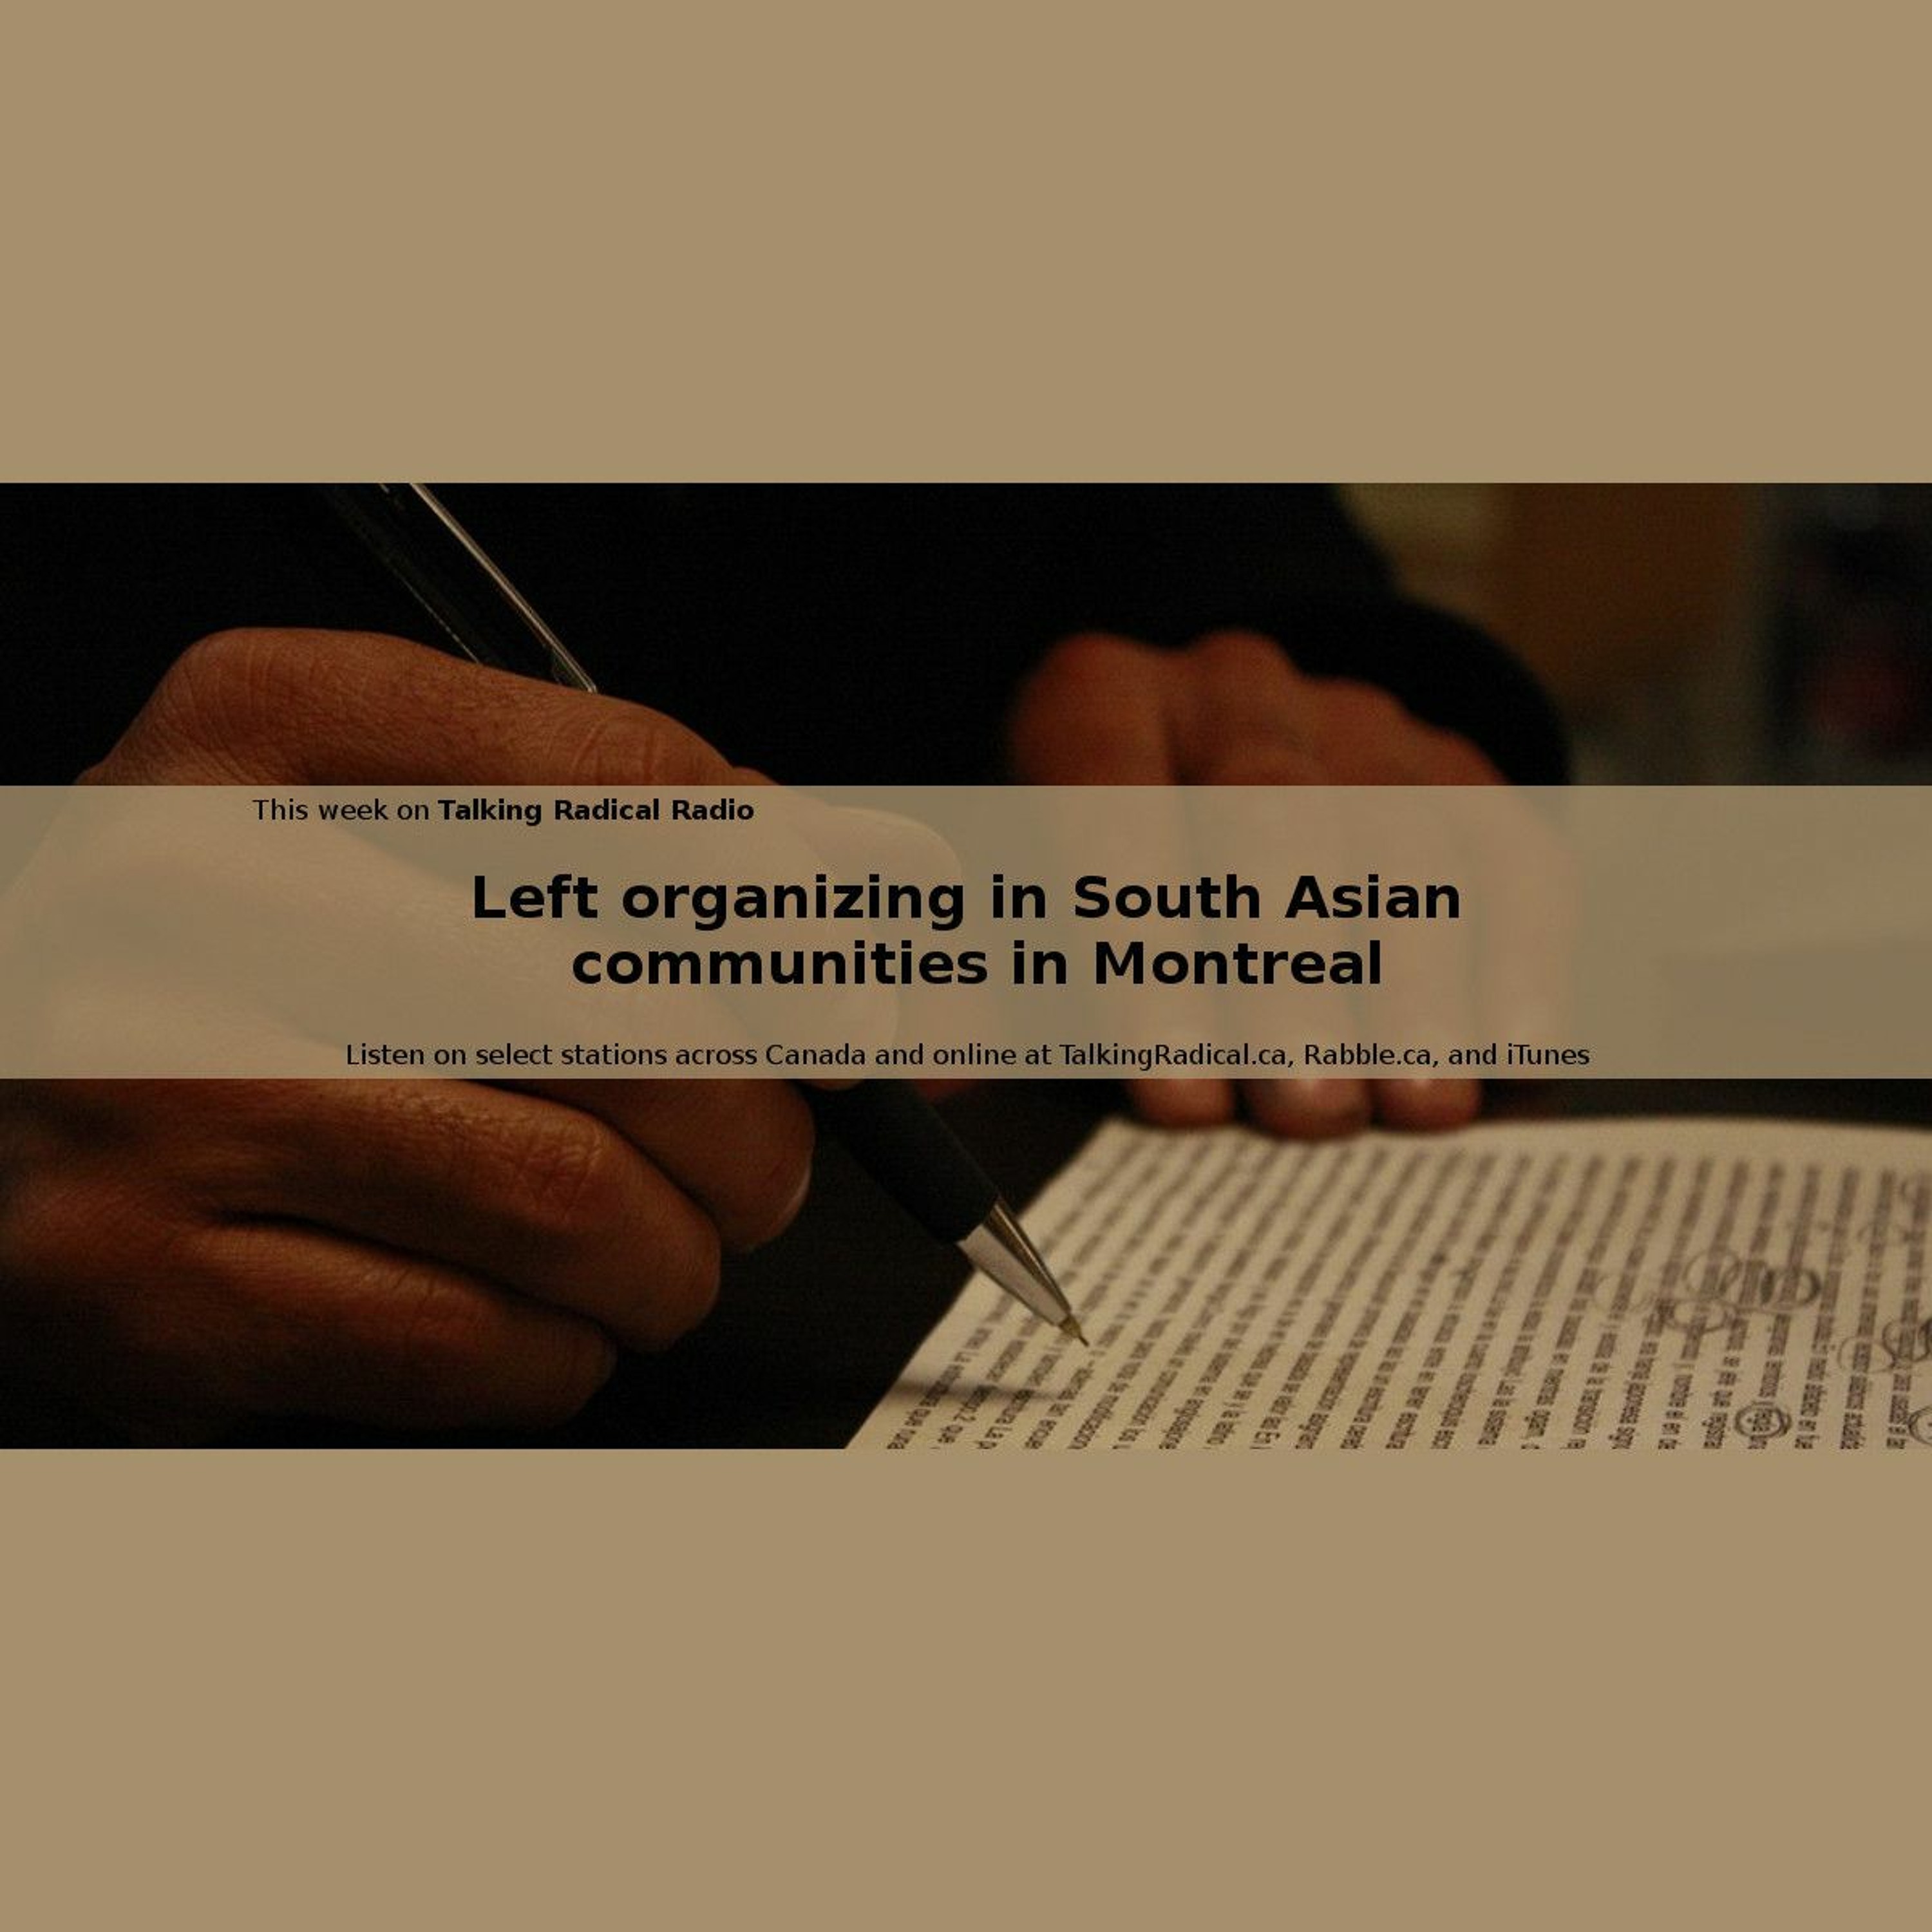 Left organizing in South Asian communities in Montreal